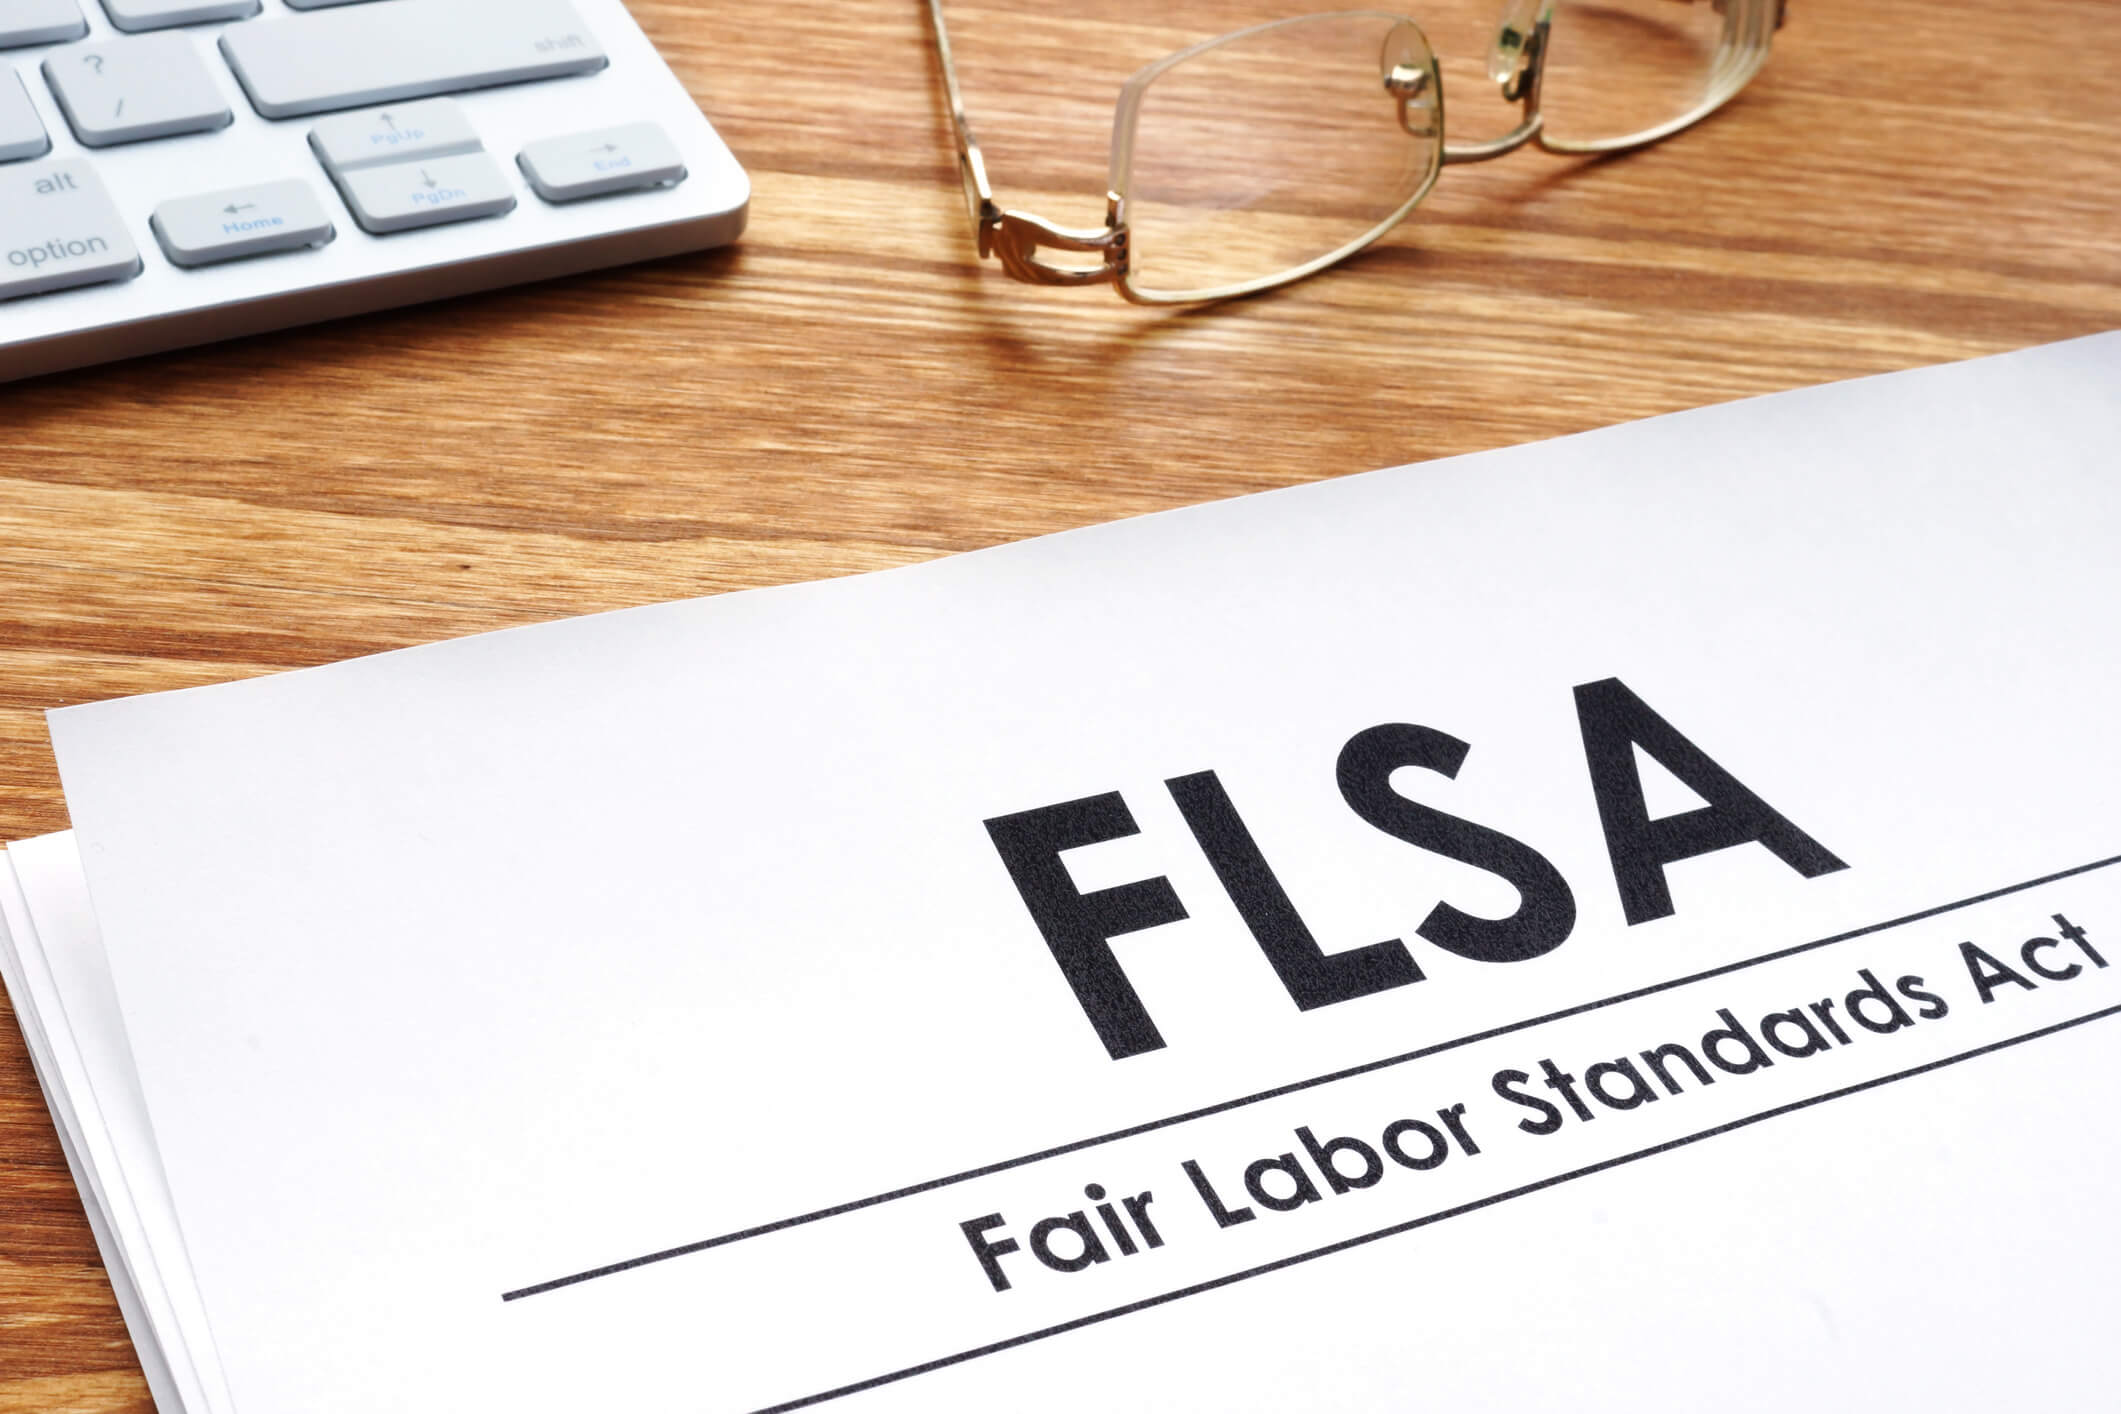 Austin and the Fair Labor Standards Act